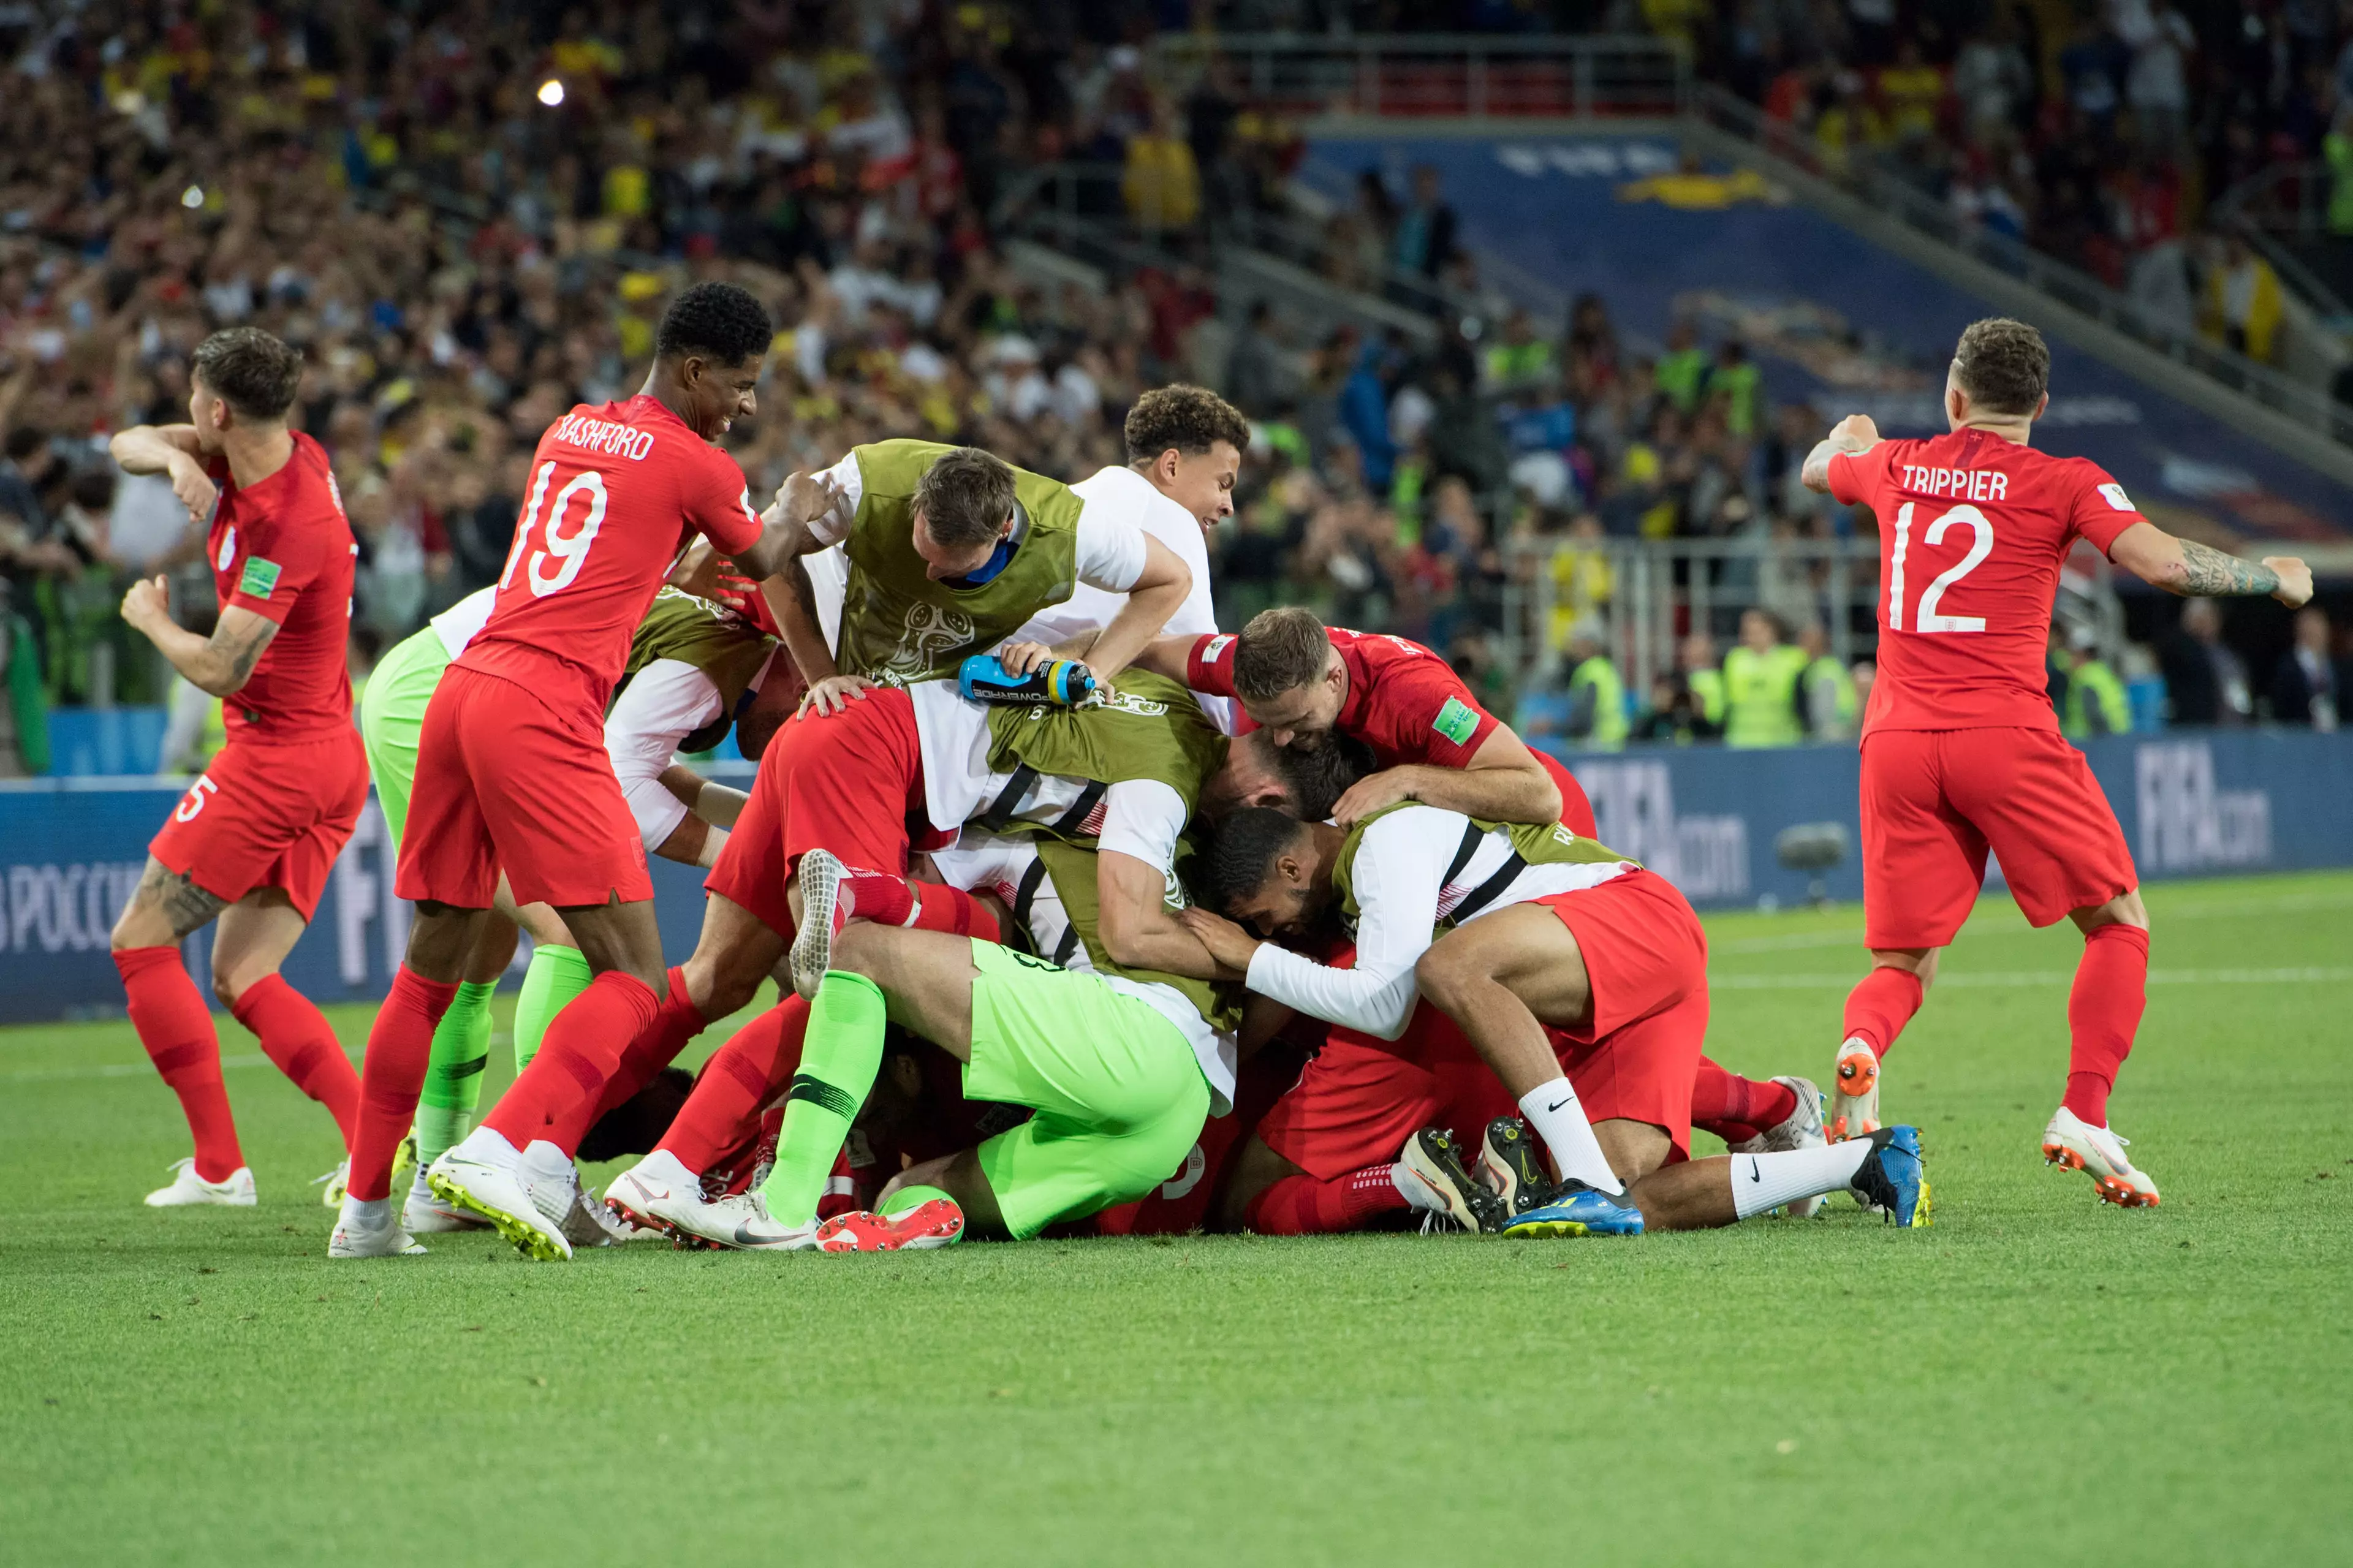 England celebrate winning a penalty shoot-out. Image: PA Images